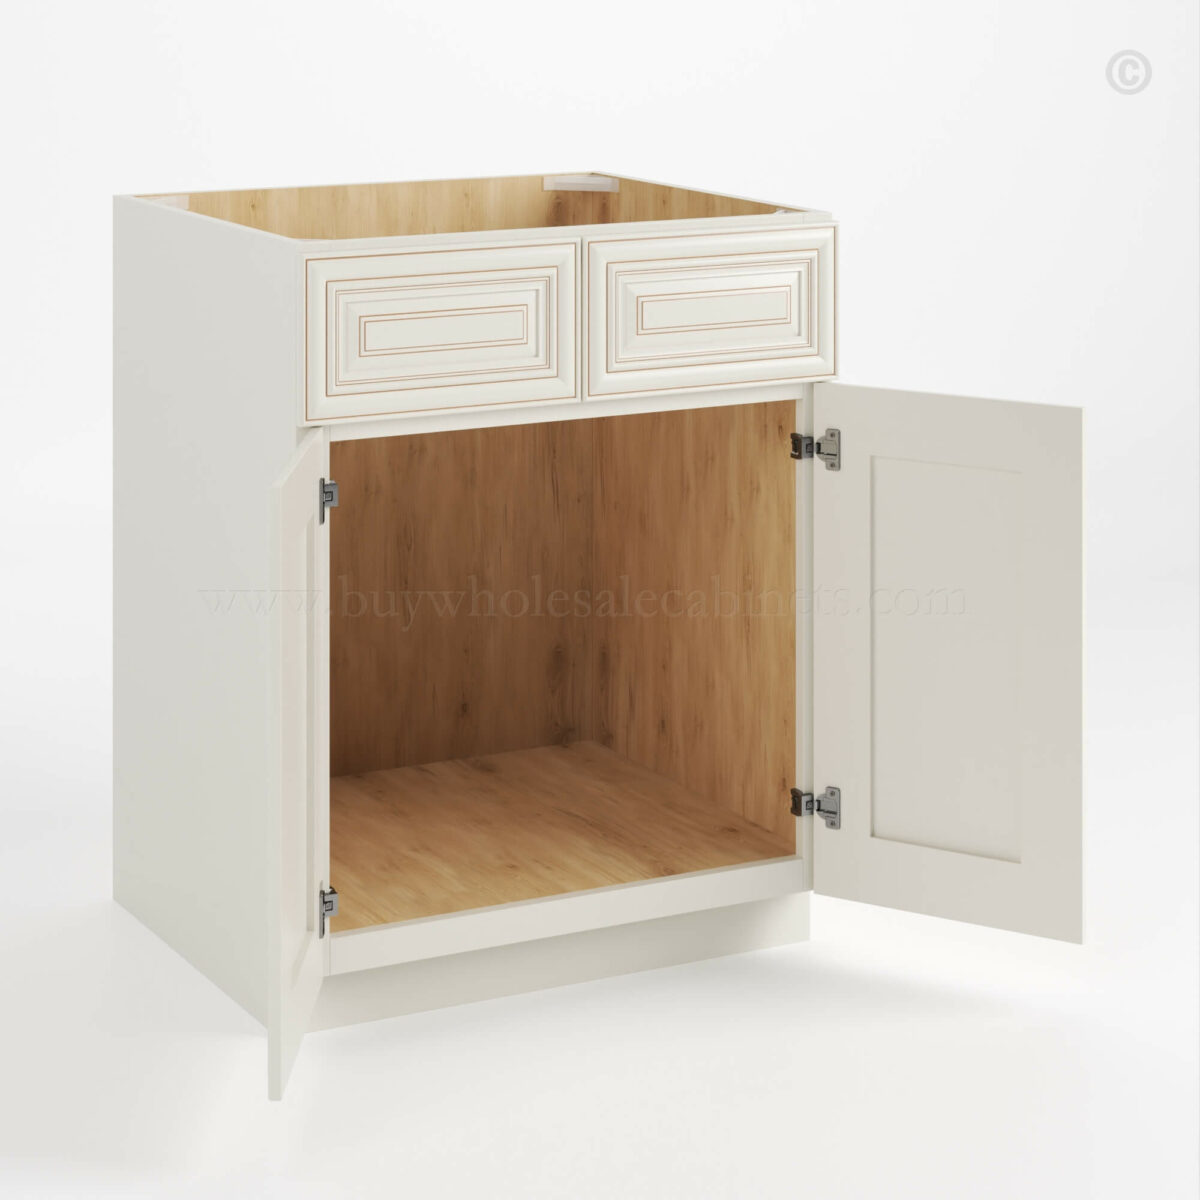 Charleston White Raised Panel Sink Base With Double Doors and Drawers image 1